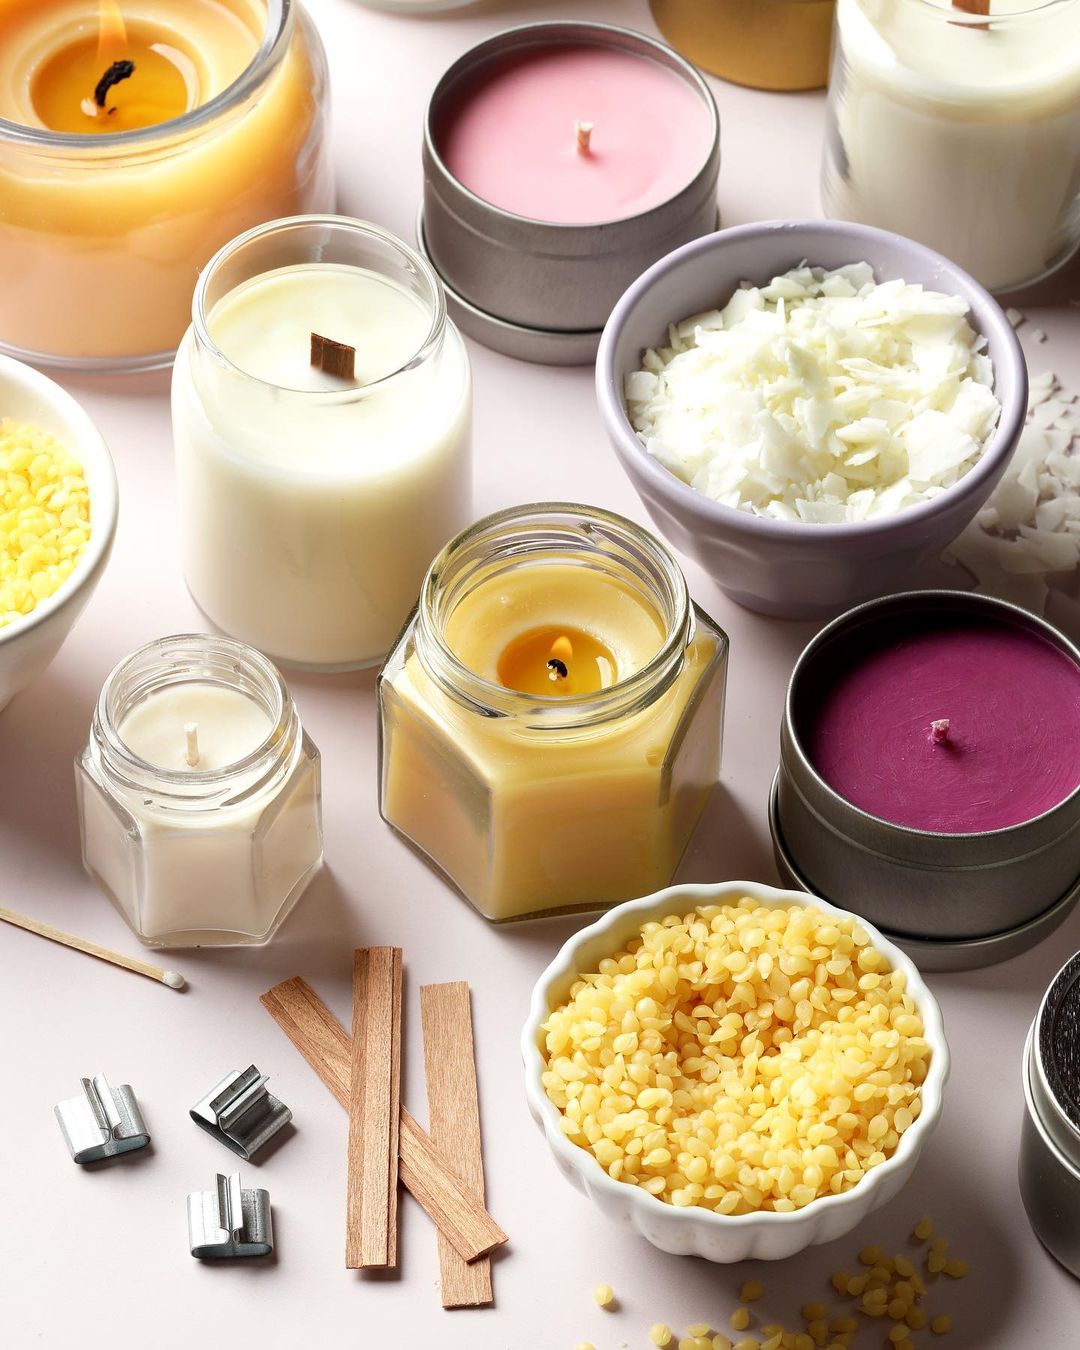 How to Test Fragrances in Candles